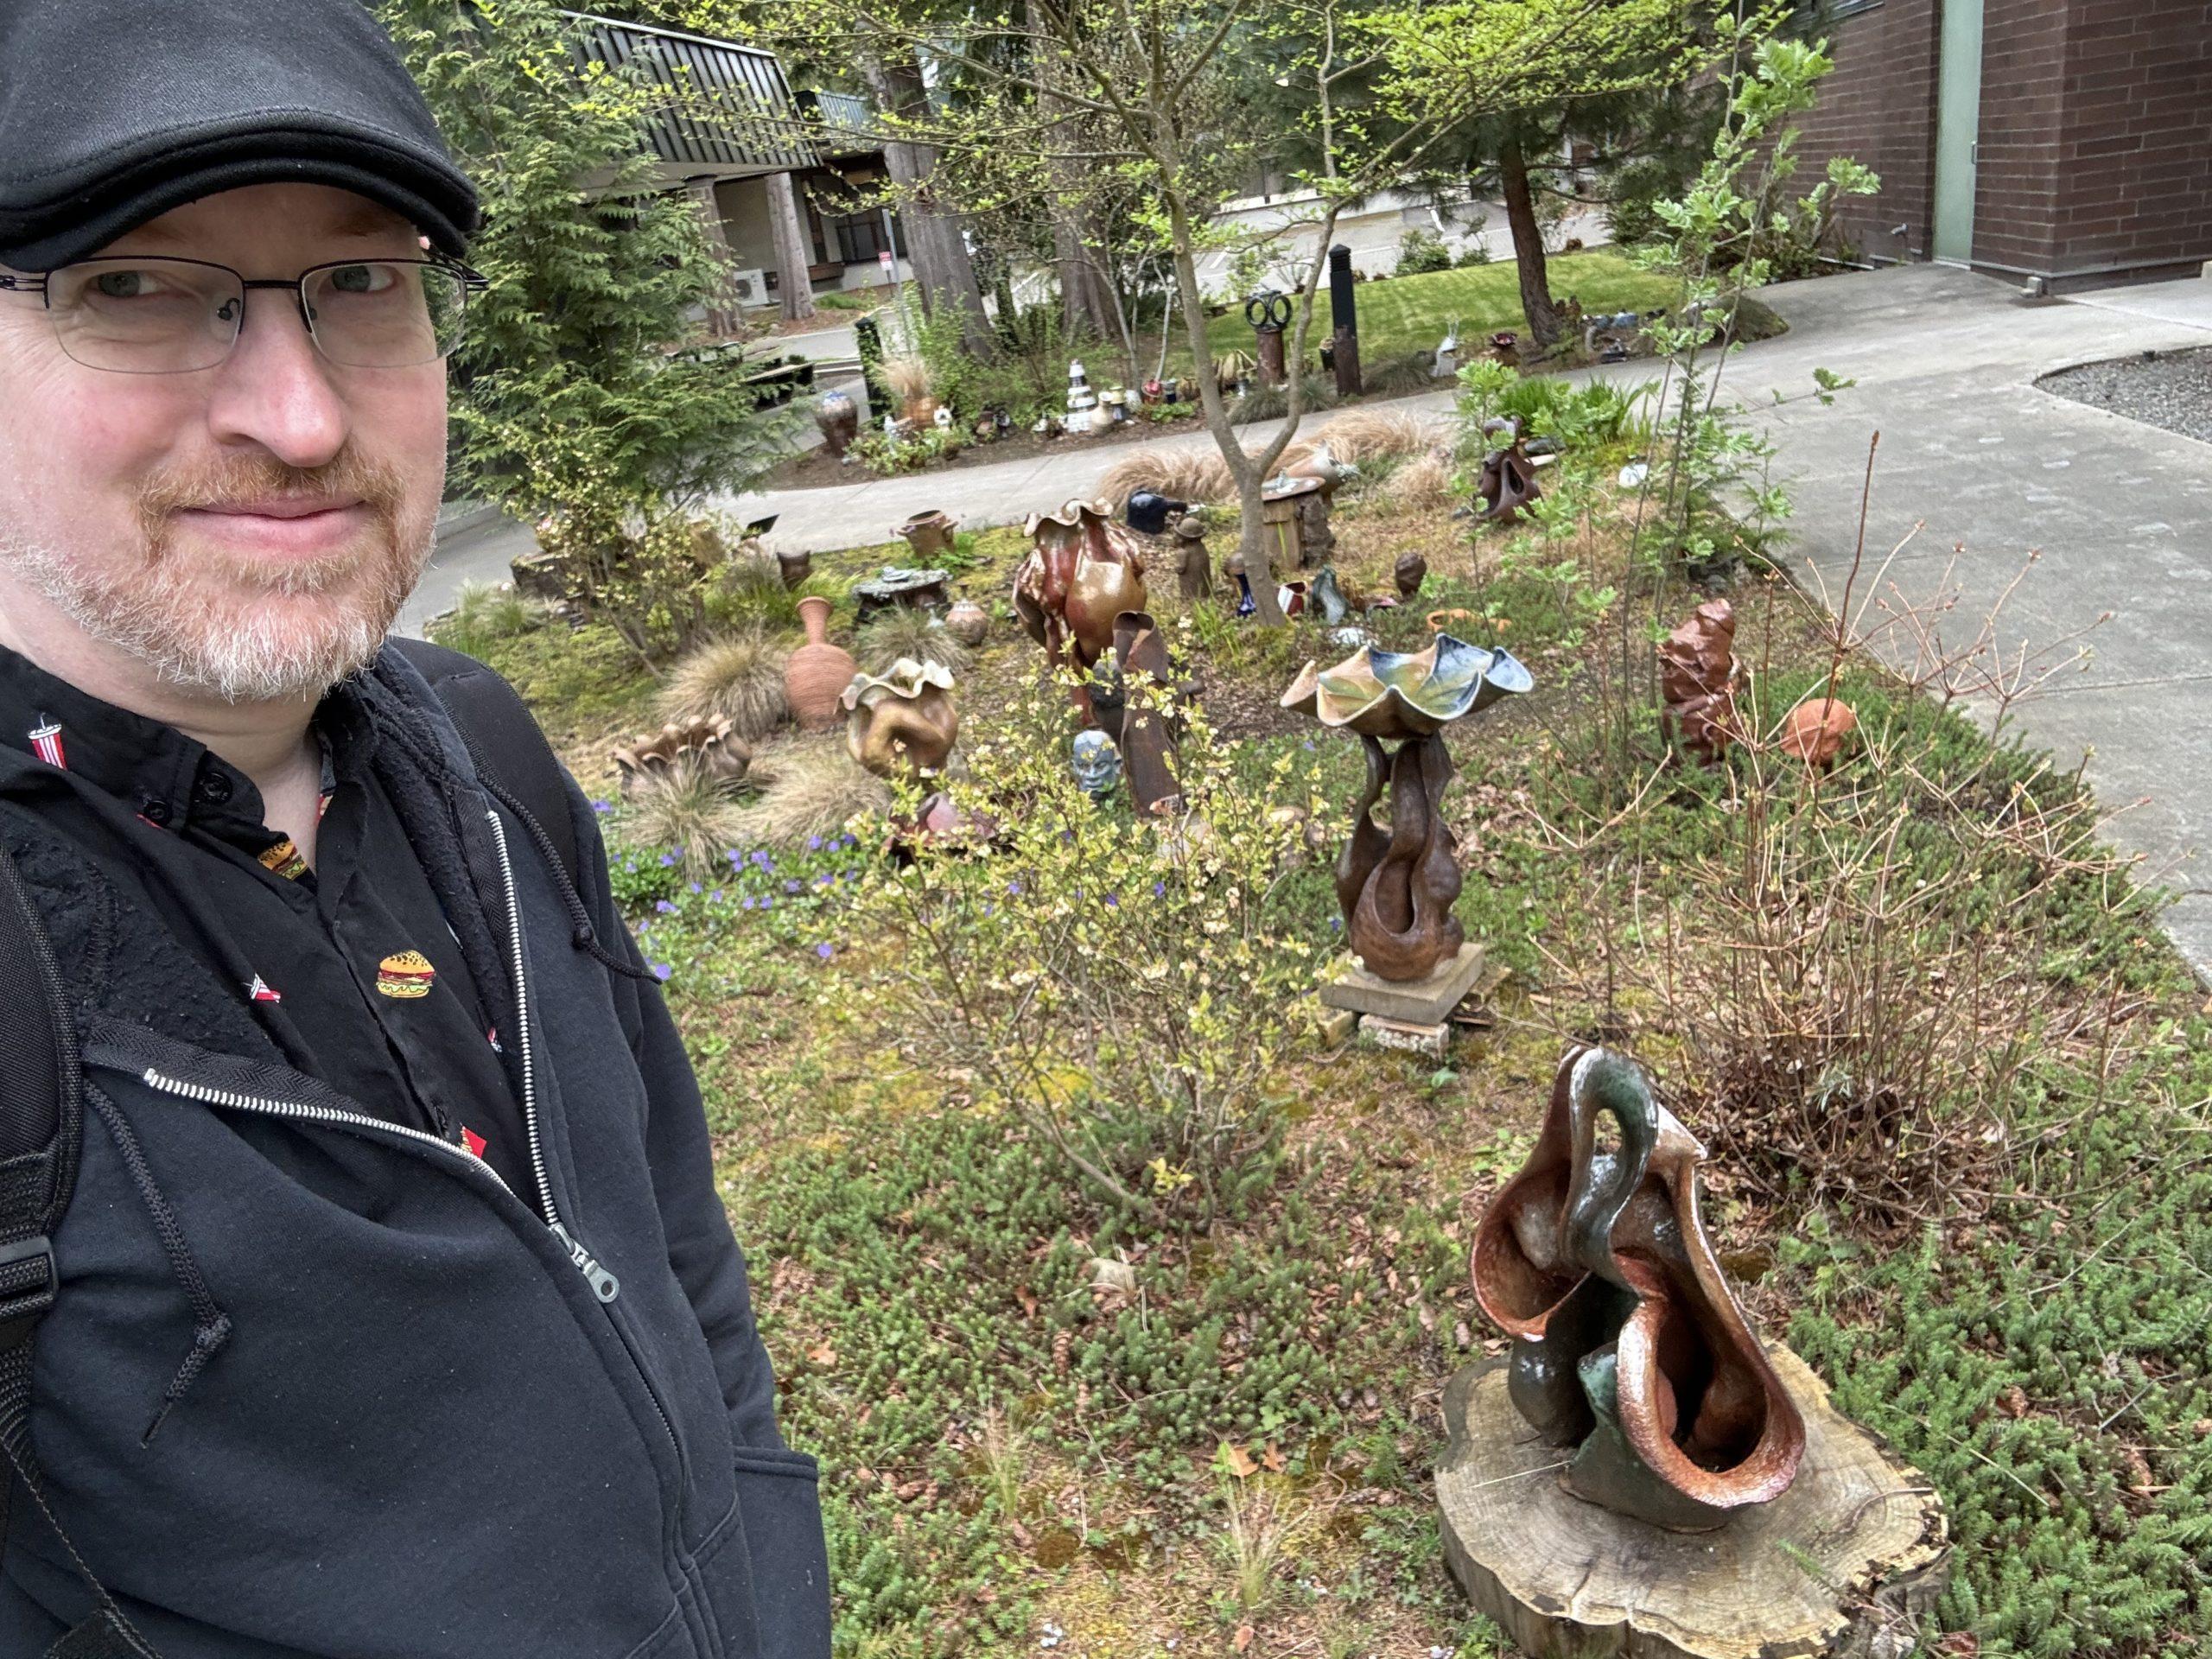 Me standing in front of a landscaped area decorated with various bits of pottery. There are vases, a bird bath, and several abstract forms. More pottery is visible in the background across a paved path.